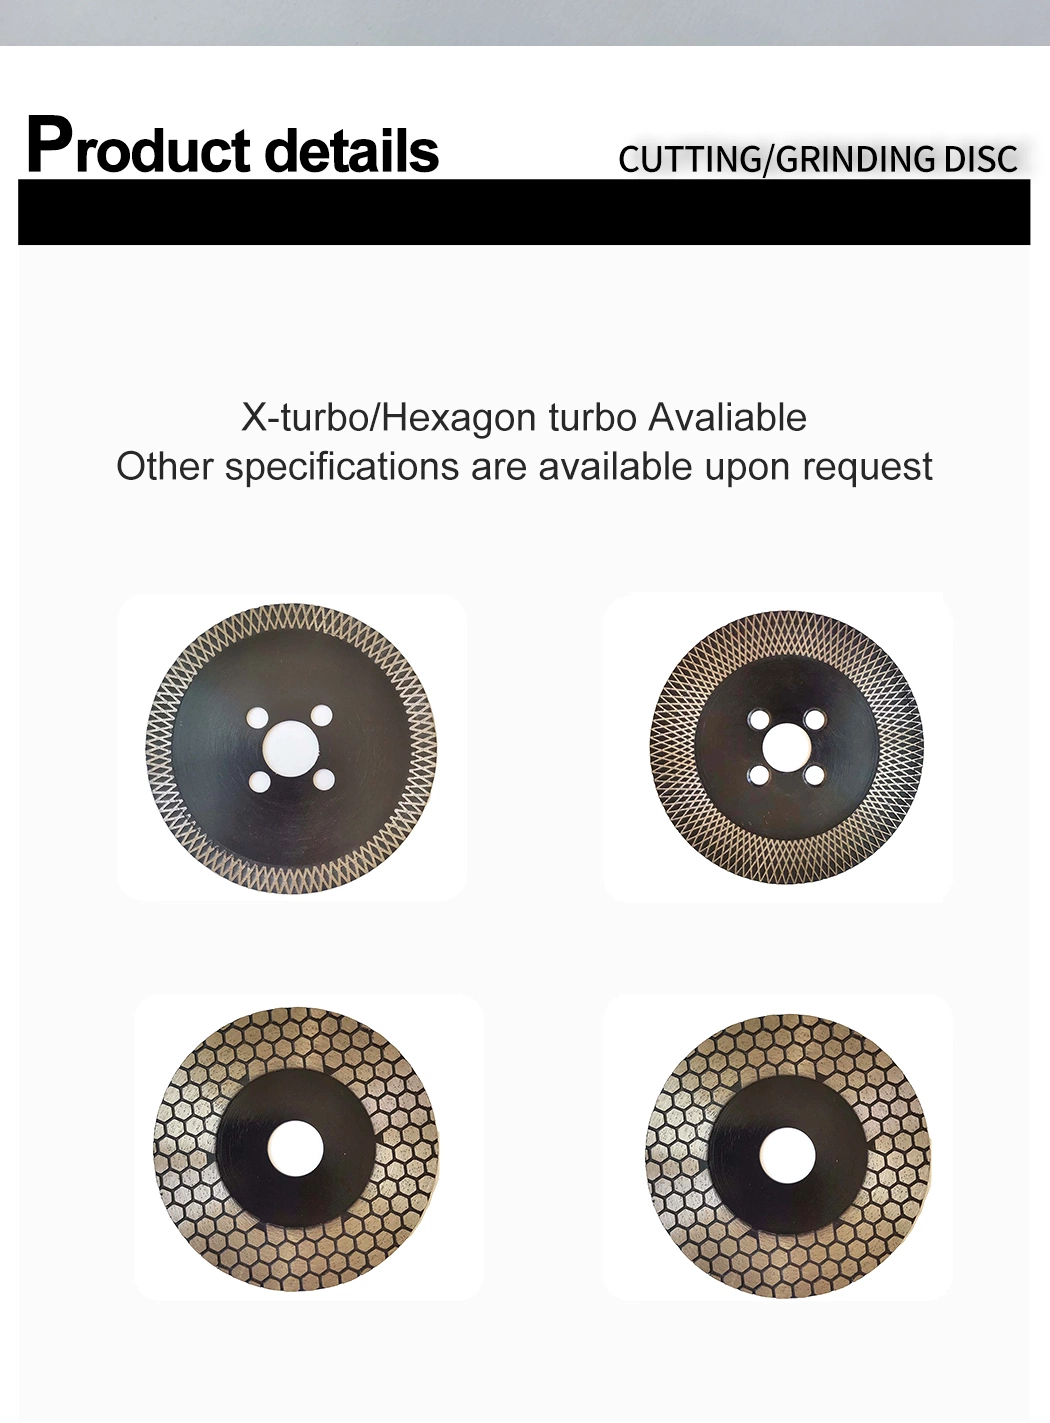 China Factory Hexagon Turbo 115mm 125mm 2 in 1 Dual-Purpose Cutting-Angle Grinding Mitering Disc for Cutting Ceramic/Porcelain /Dekton Tiles Diamond Saw Blade